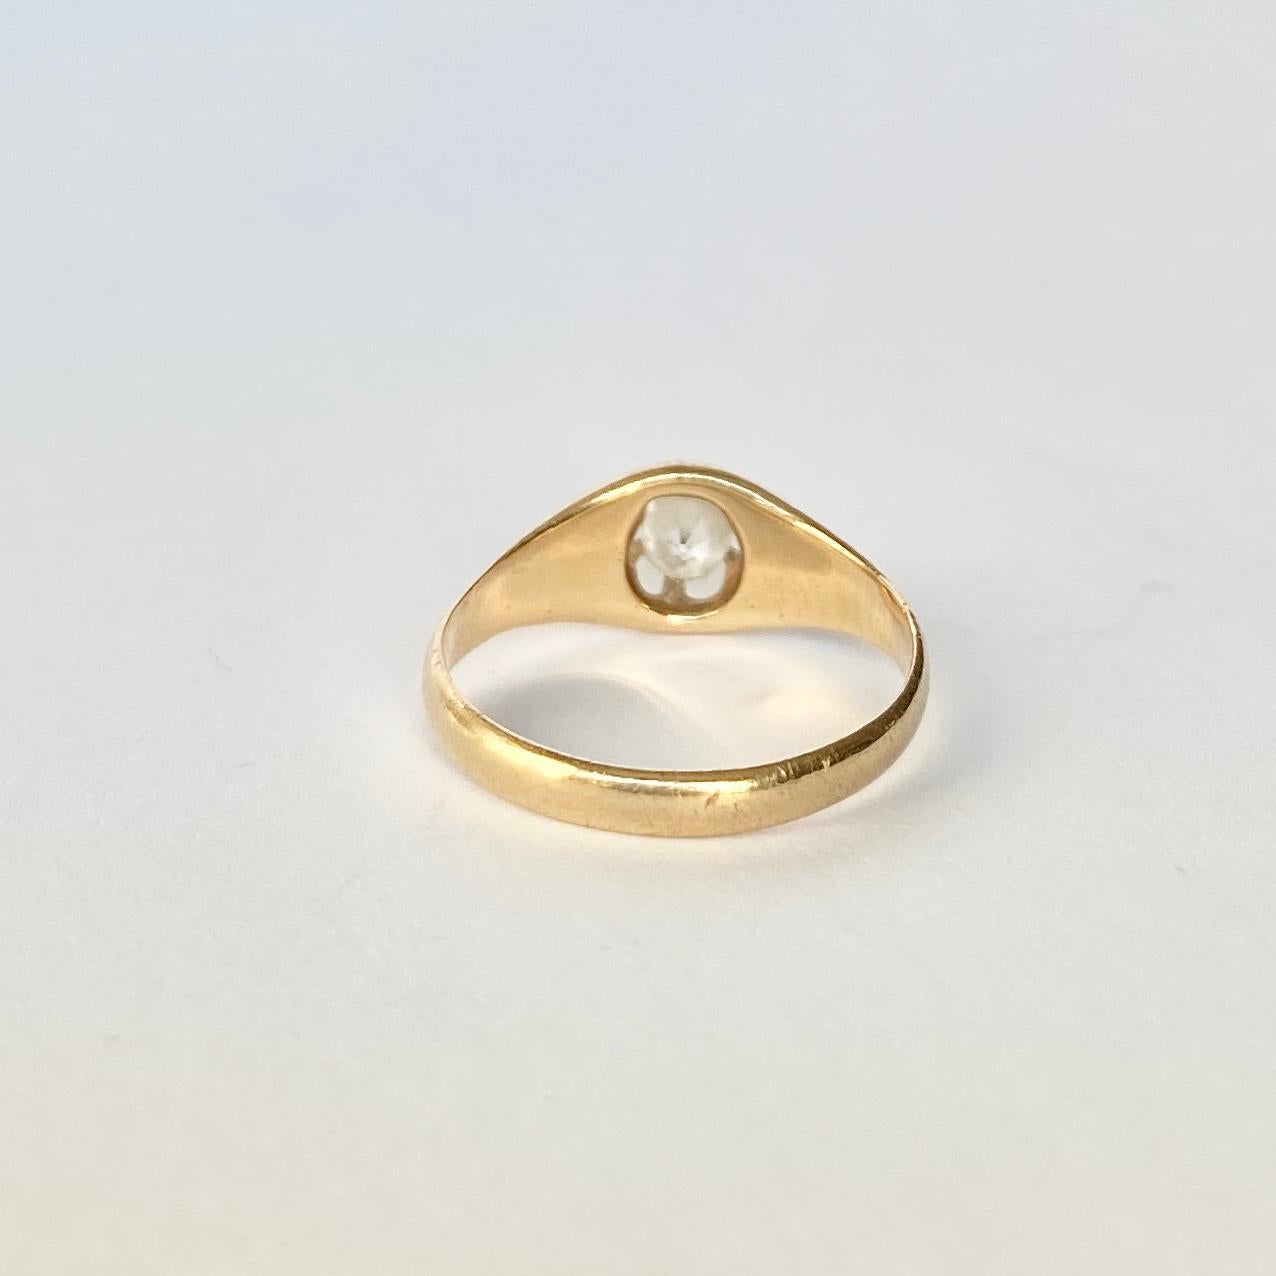 This classic band is modelled in 18carat gold and the old mine cut diamond which is set in the star setting measures 20pts. 

Size: J 1/2 or 5

Weight: 2.3g
